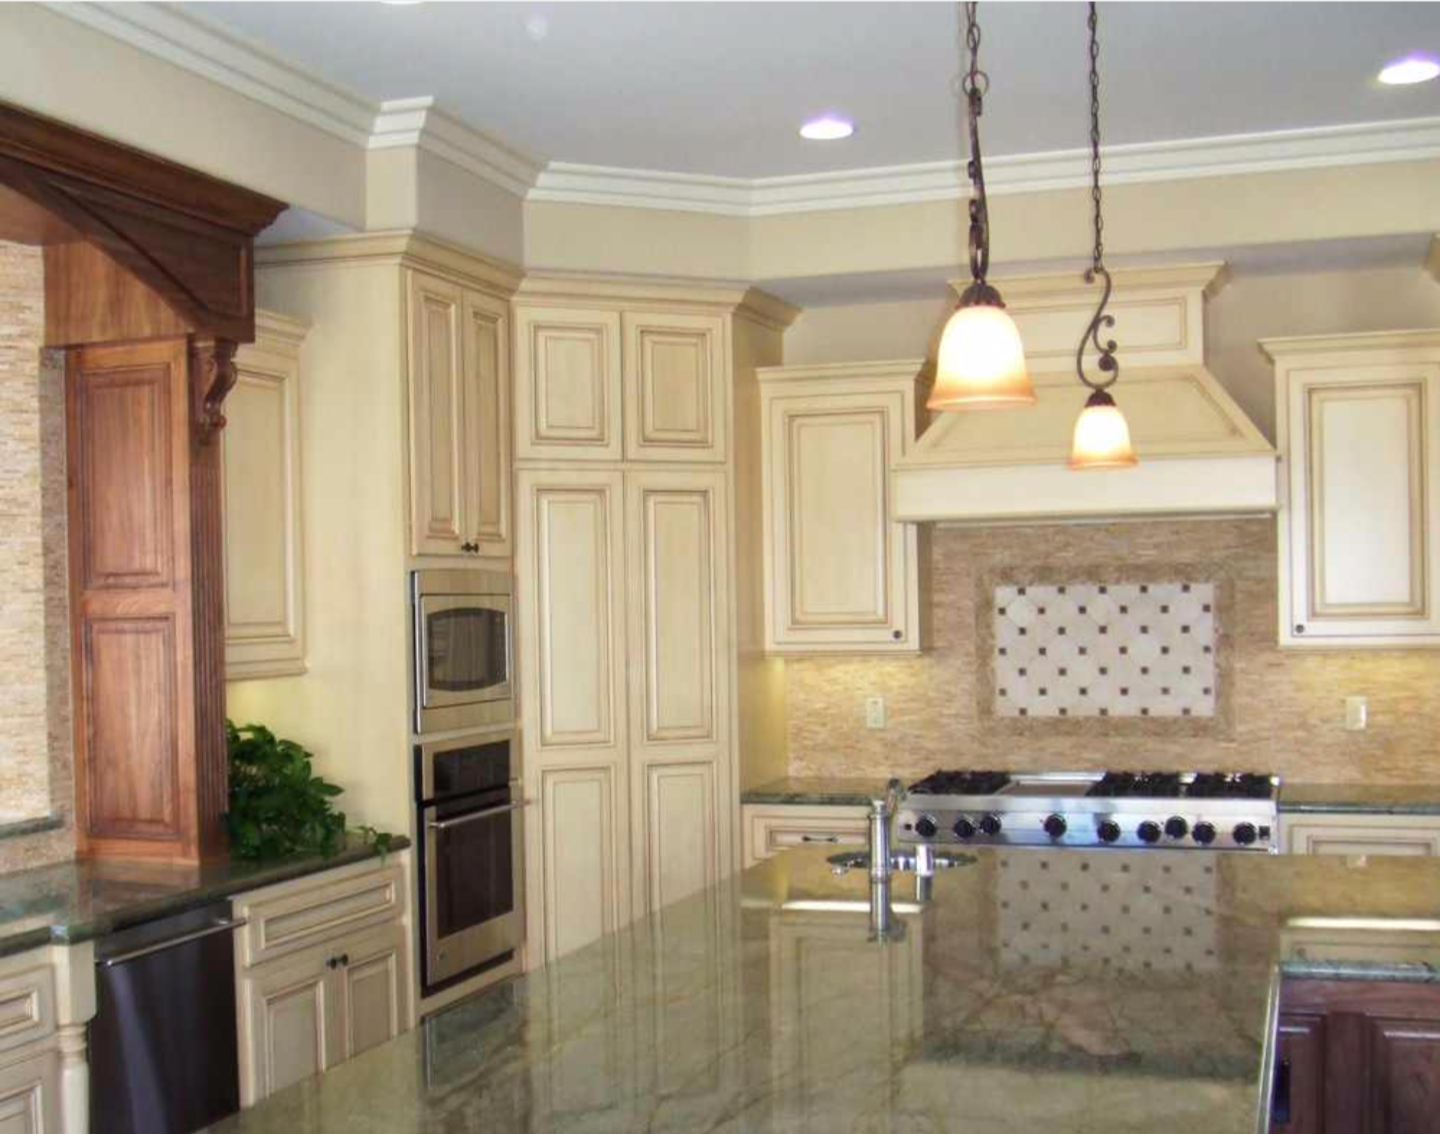 Cabinet Refinishing Denver Cabinets Refinishing And Cabinet Painting Denver Colorado 720 219 9716